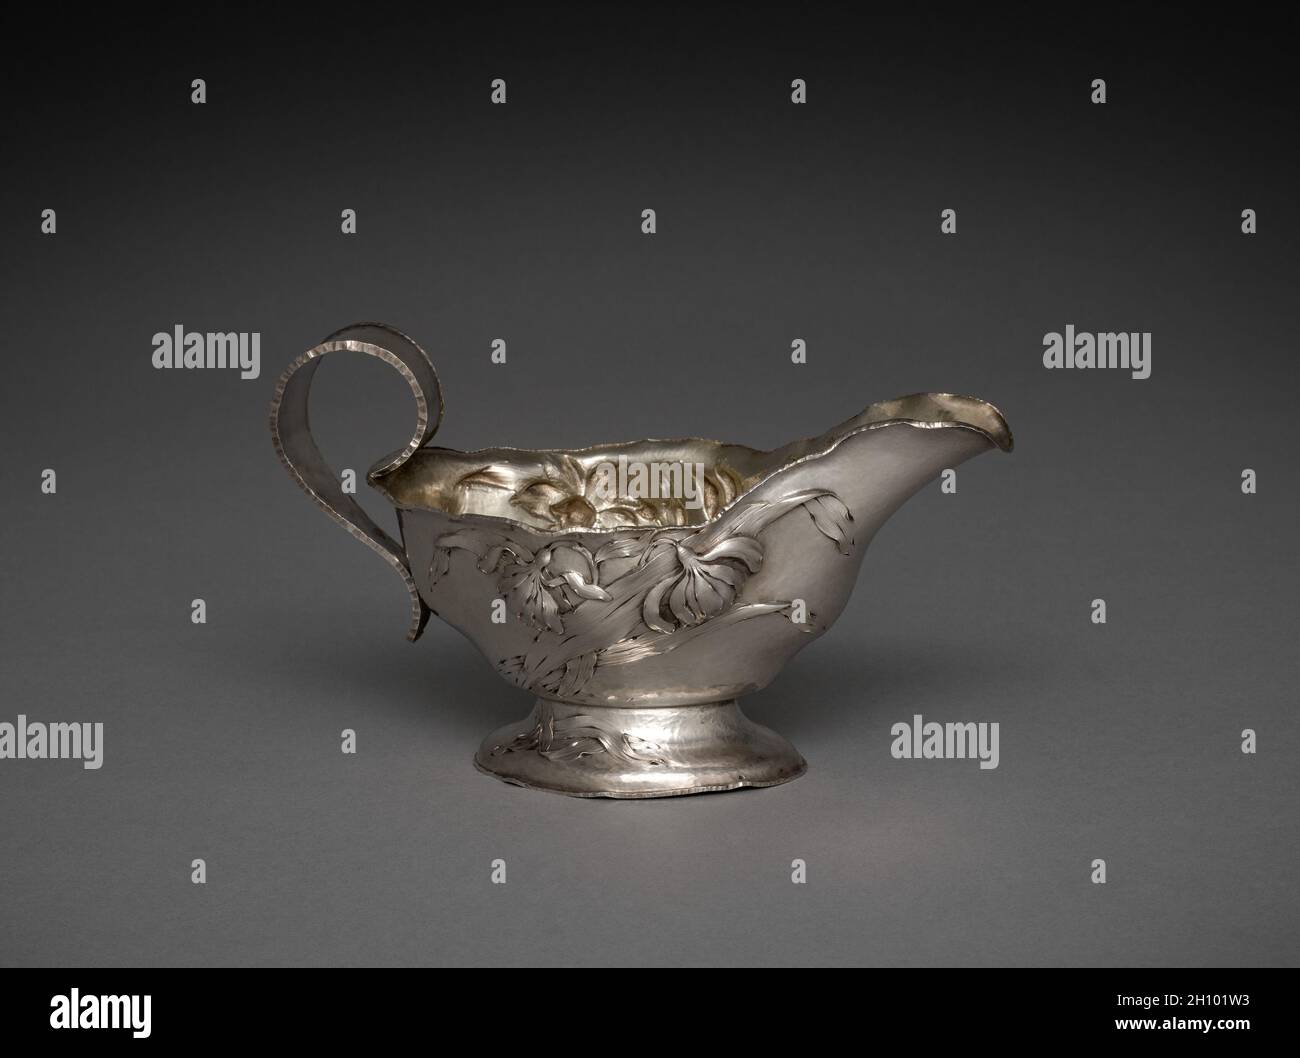 Sauce Boat and Tray, c. 1890. Barbour Silver Company (American), attributed to William Christmas Codman (British, 1839-1921). Silver; overall: 11.4 x 19.7 x 9.8 cm (4 1/2 x 7 3/4 x 3 7/8 in.). Stock Photo